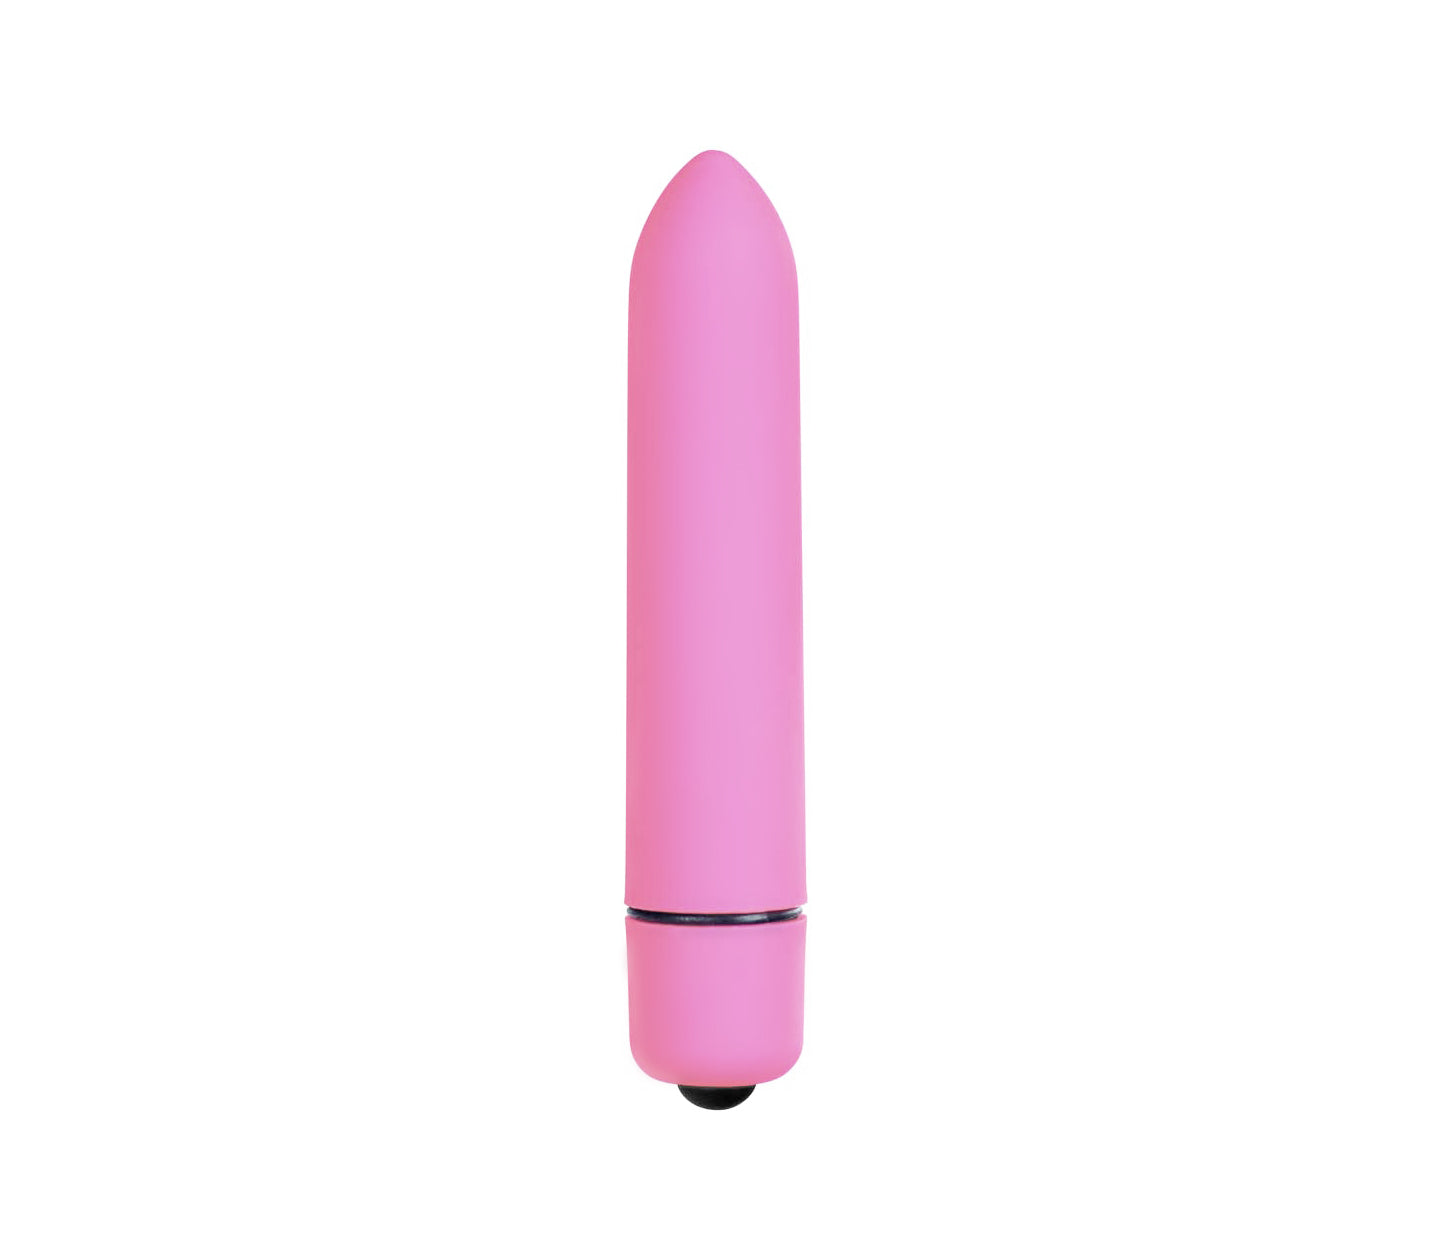 Bul001-10 Speed Bullet W/ 7 Functions Vibrator Baby Pink - Club X